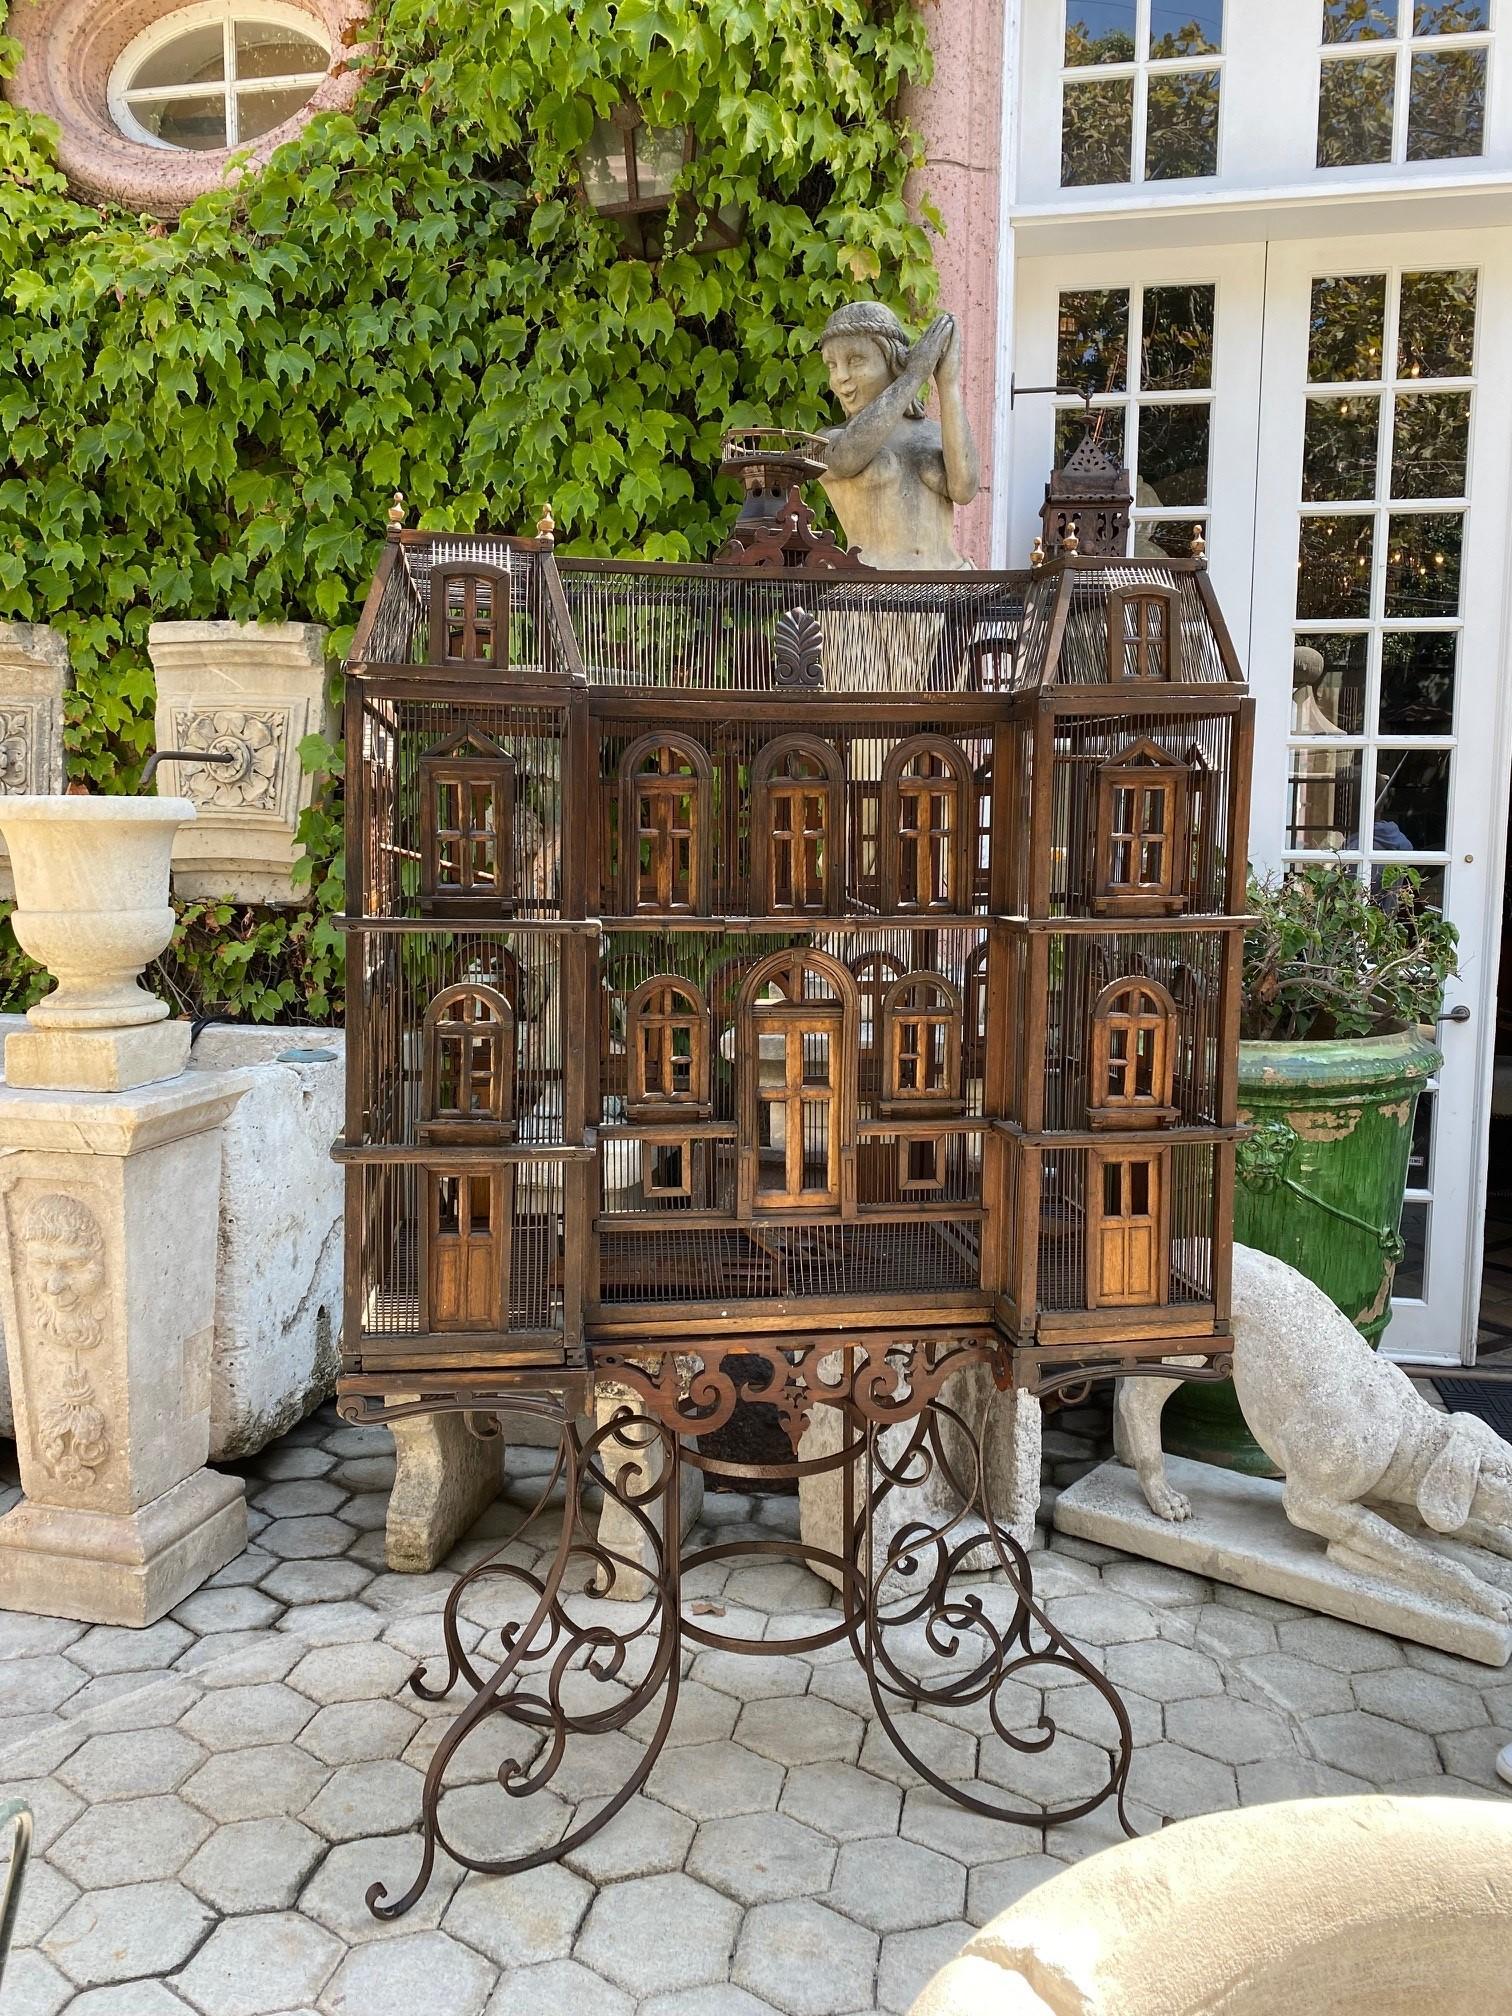 Rare and imposing Chateau large 19th century walnut hand carved and hand forged crafted Birdcage from Normandie on the original hand forged iron stand. Hand carved wood pieced fitted together with attention to details proportions and elevations. A